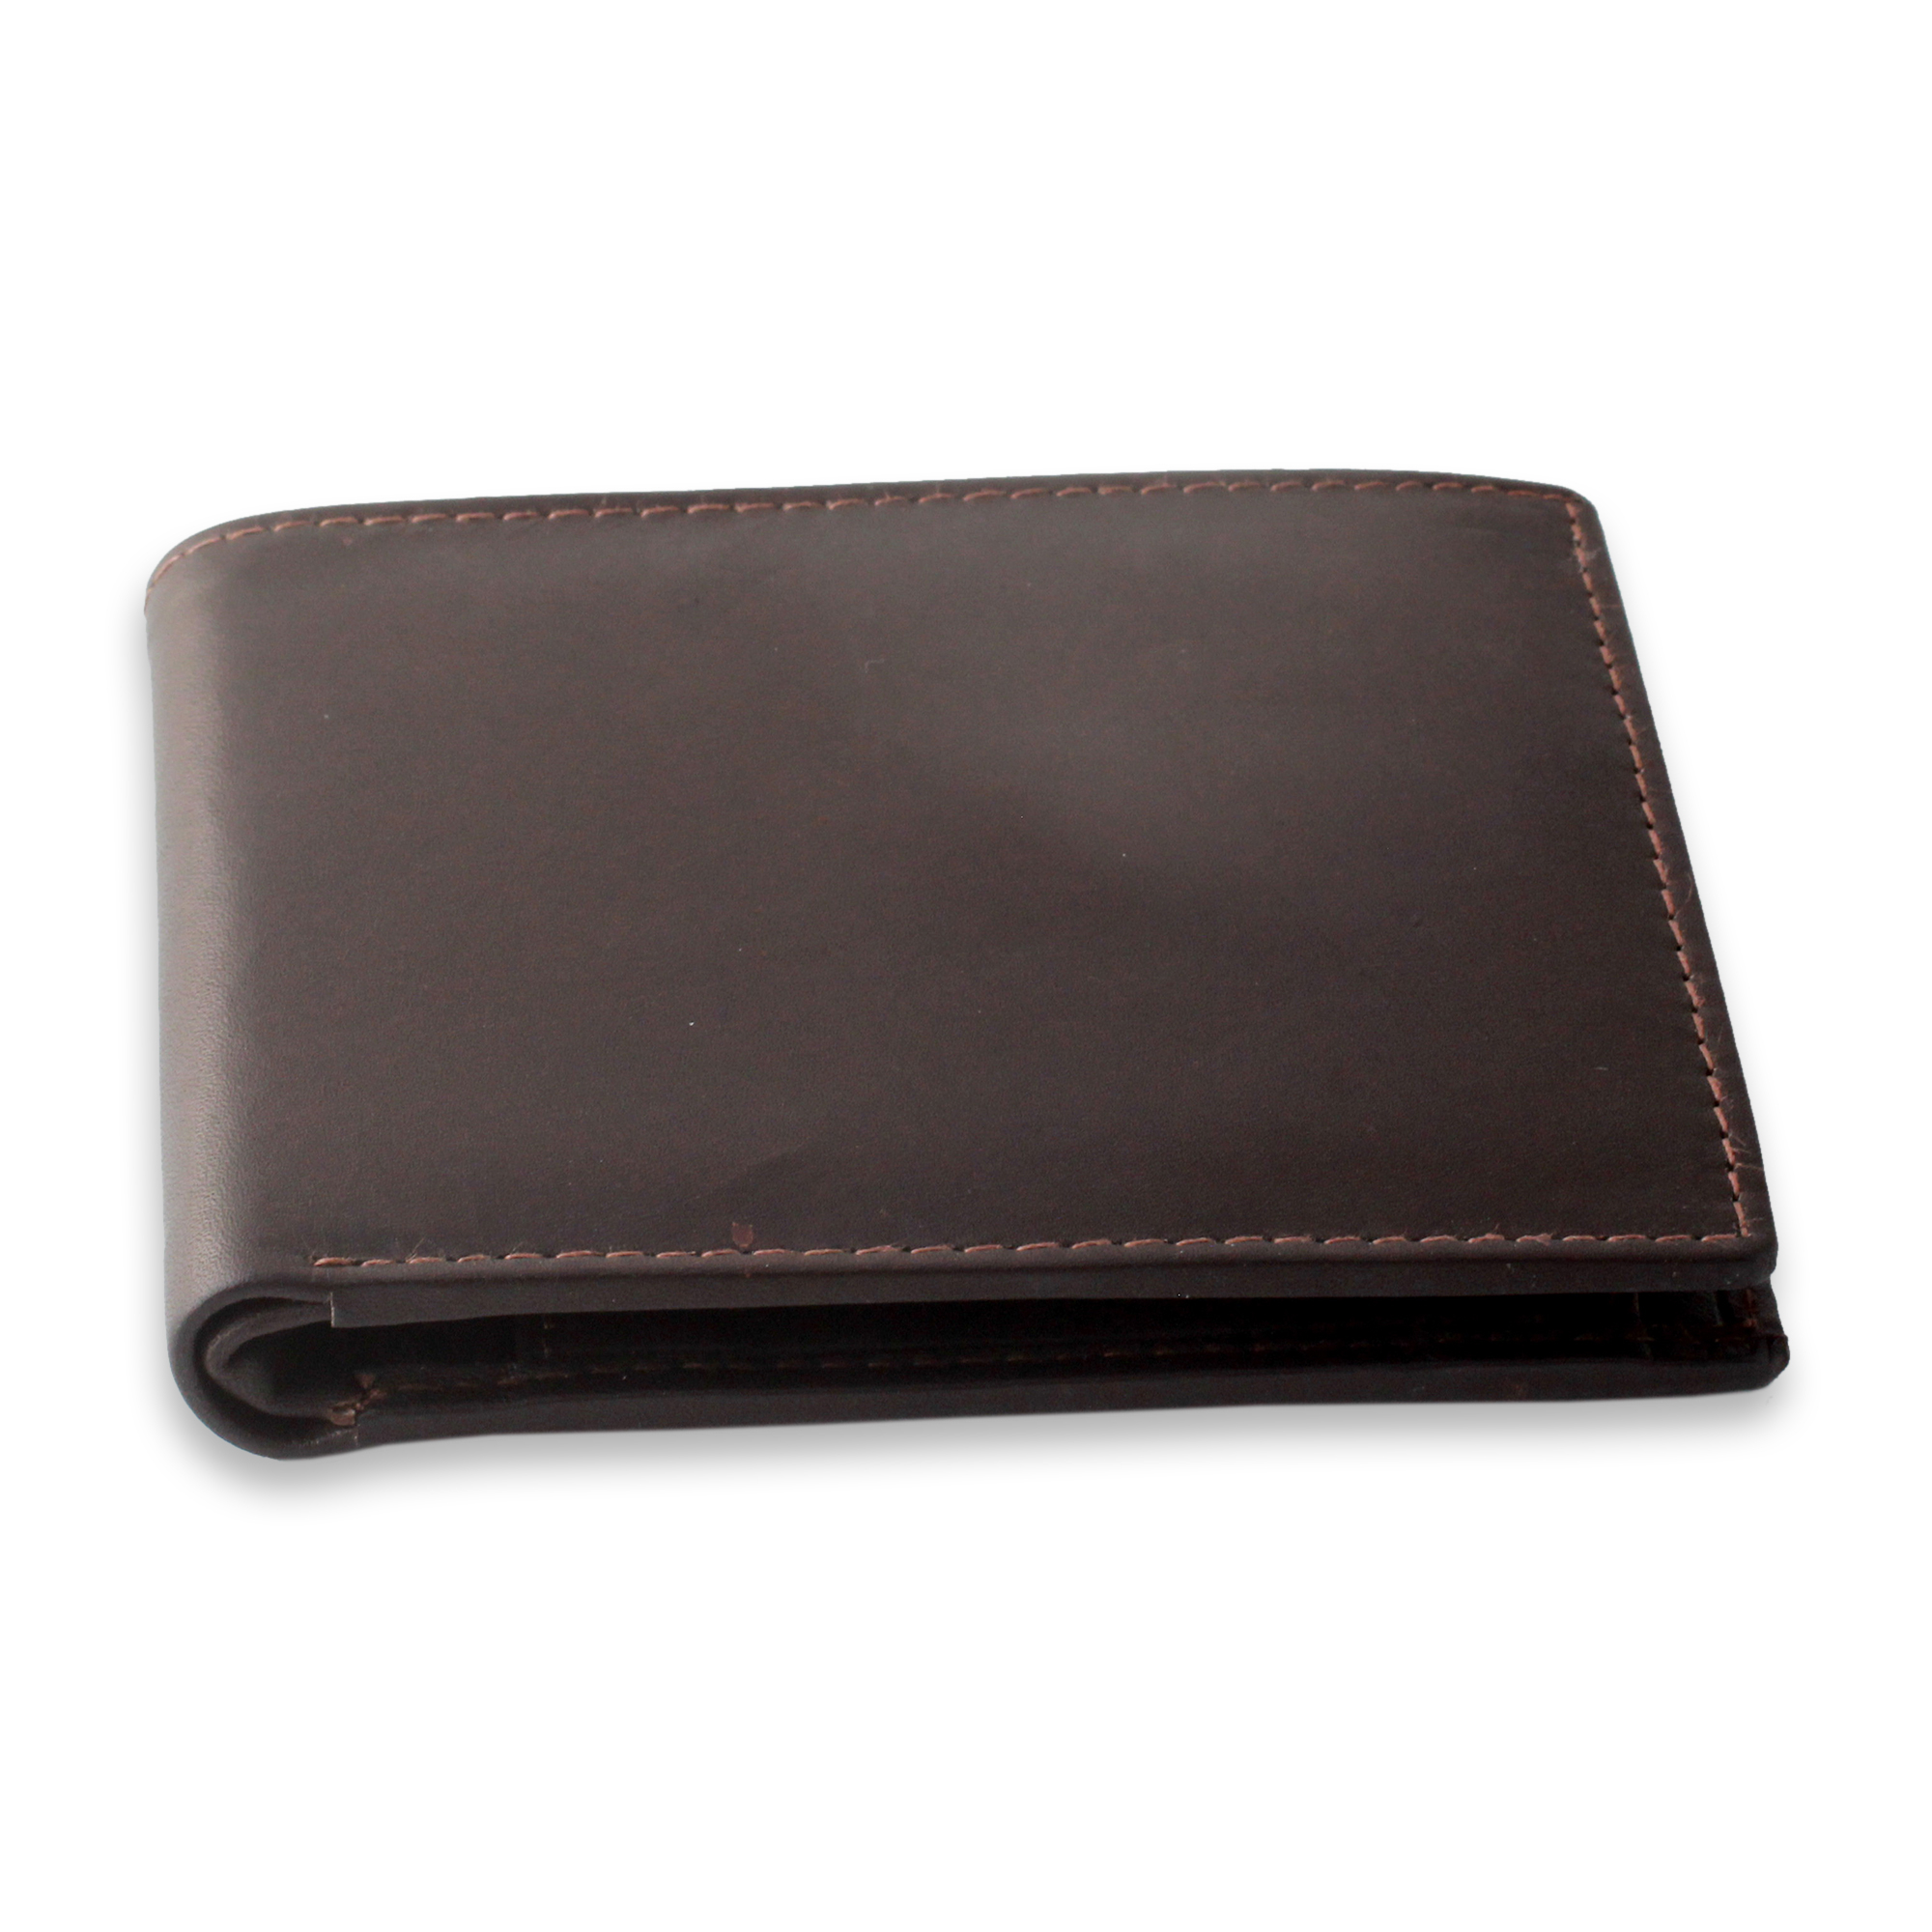 Modern Handcrafted Brown Leather Wallet for Men - Executive Brown | NOVICA